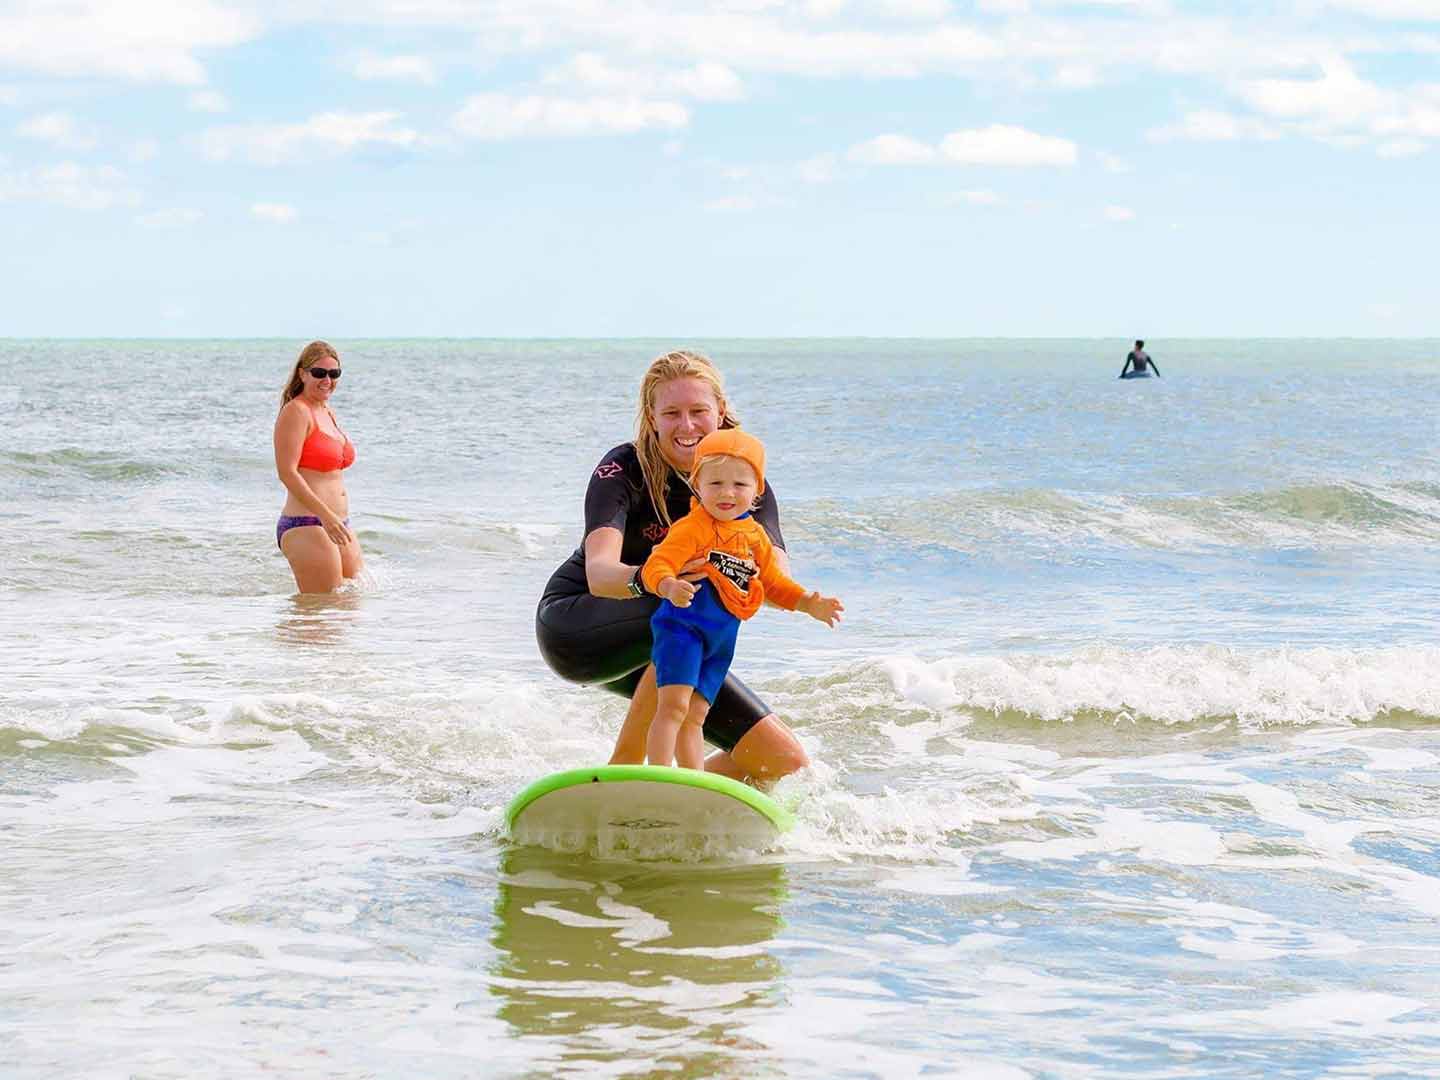 Surfing with family